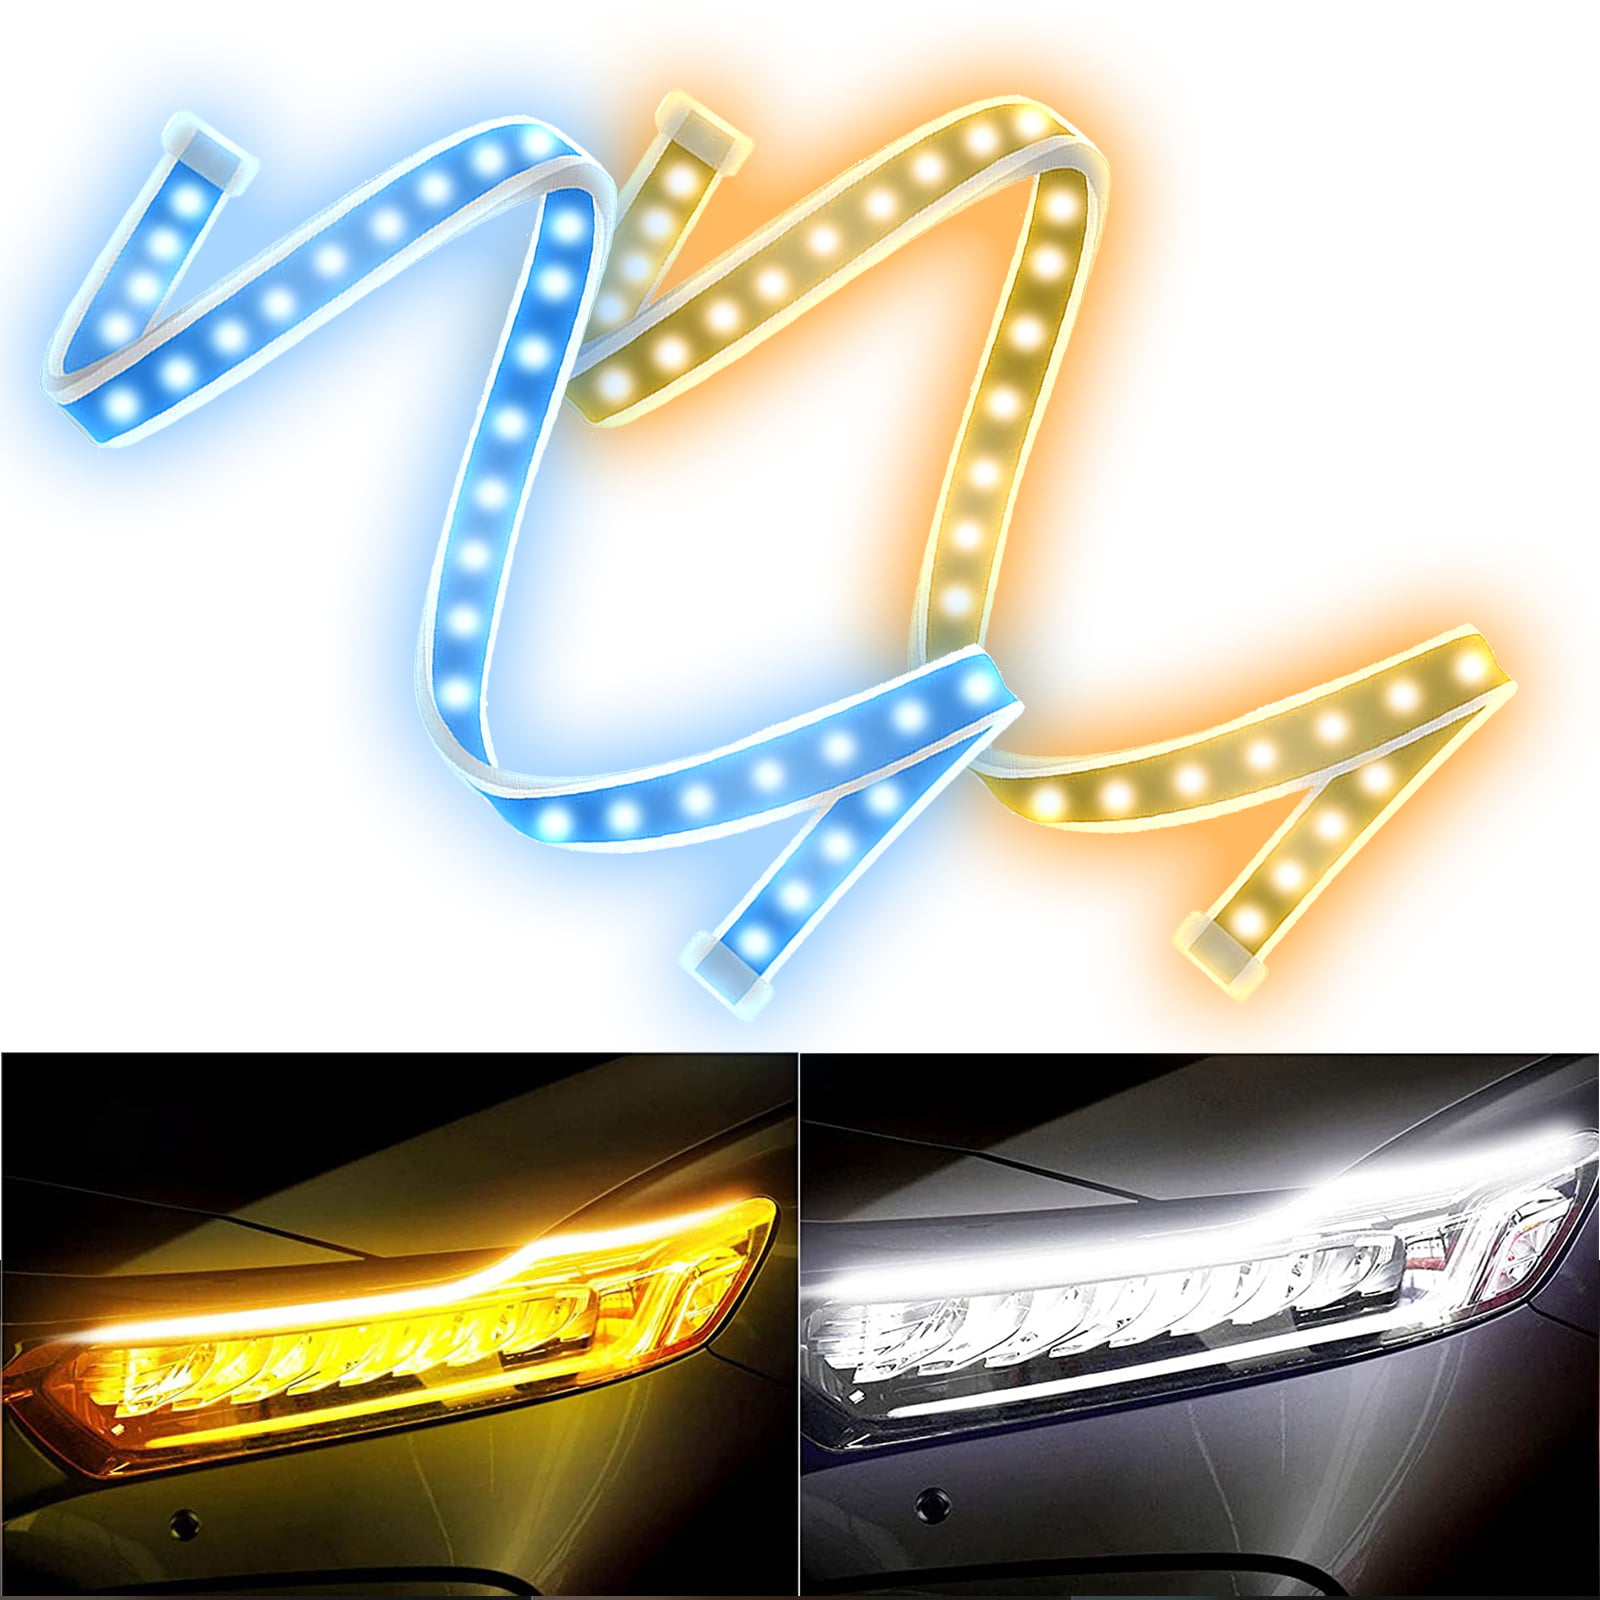 2Pcs 11-inch Ultrafine LED Strip Tube Flexible Waterproof Daytime Running Light Suitable For Switchback Headlight LED Strip,Running Light,Flowing Turn Signal Light Ice Blue/Sequence Amber 30cm 